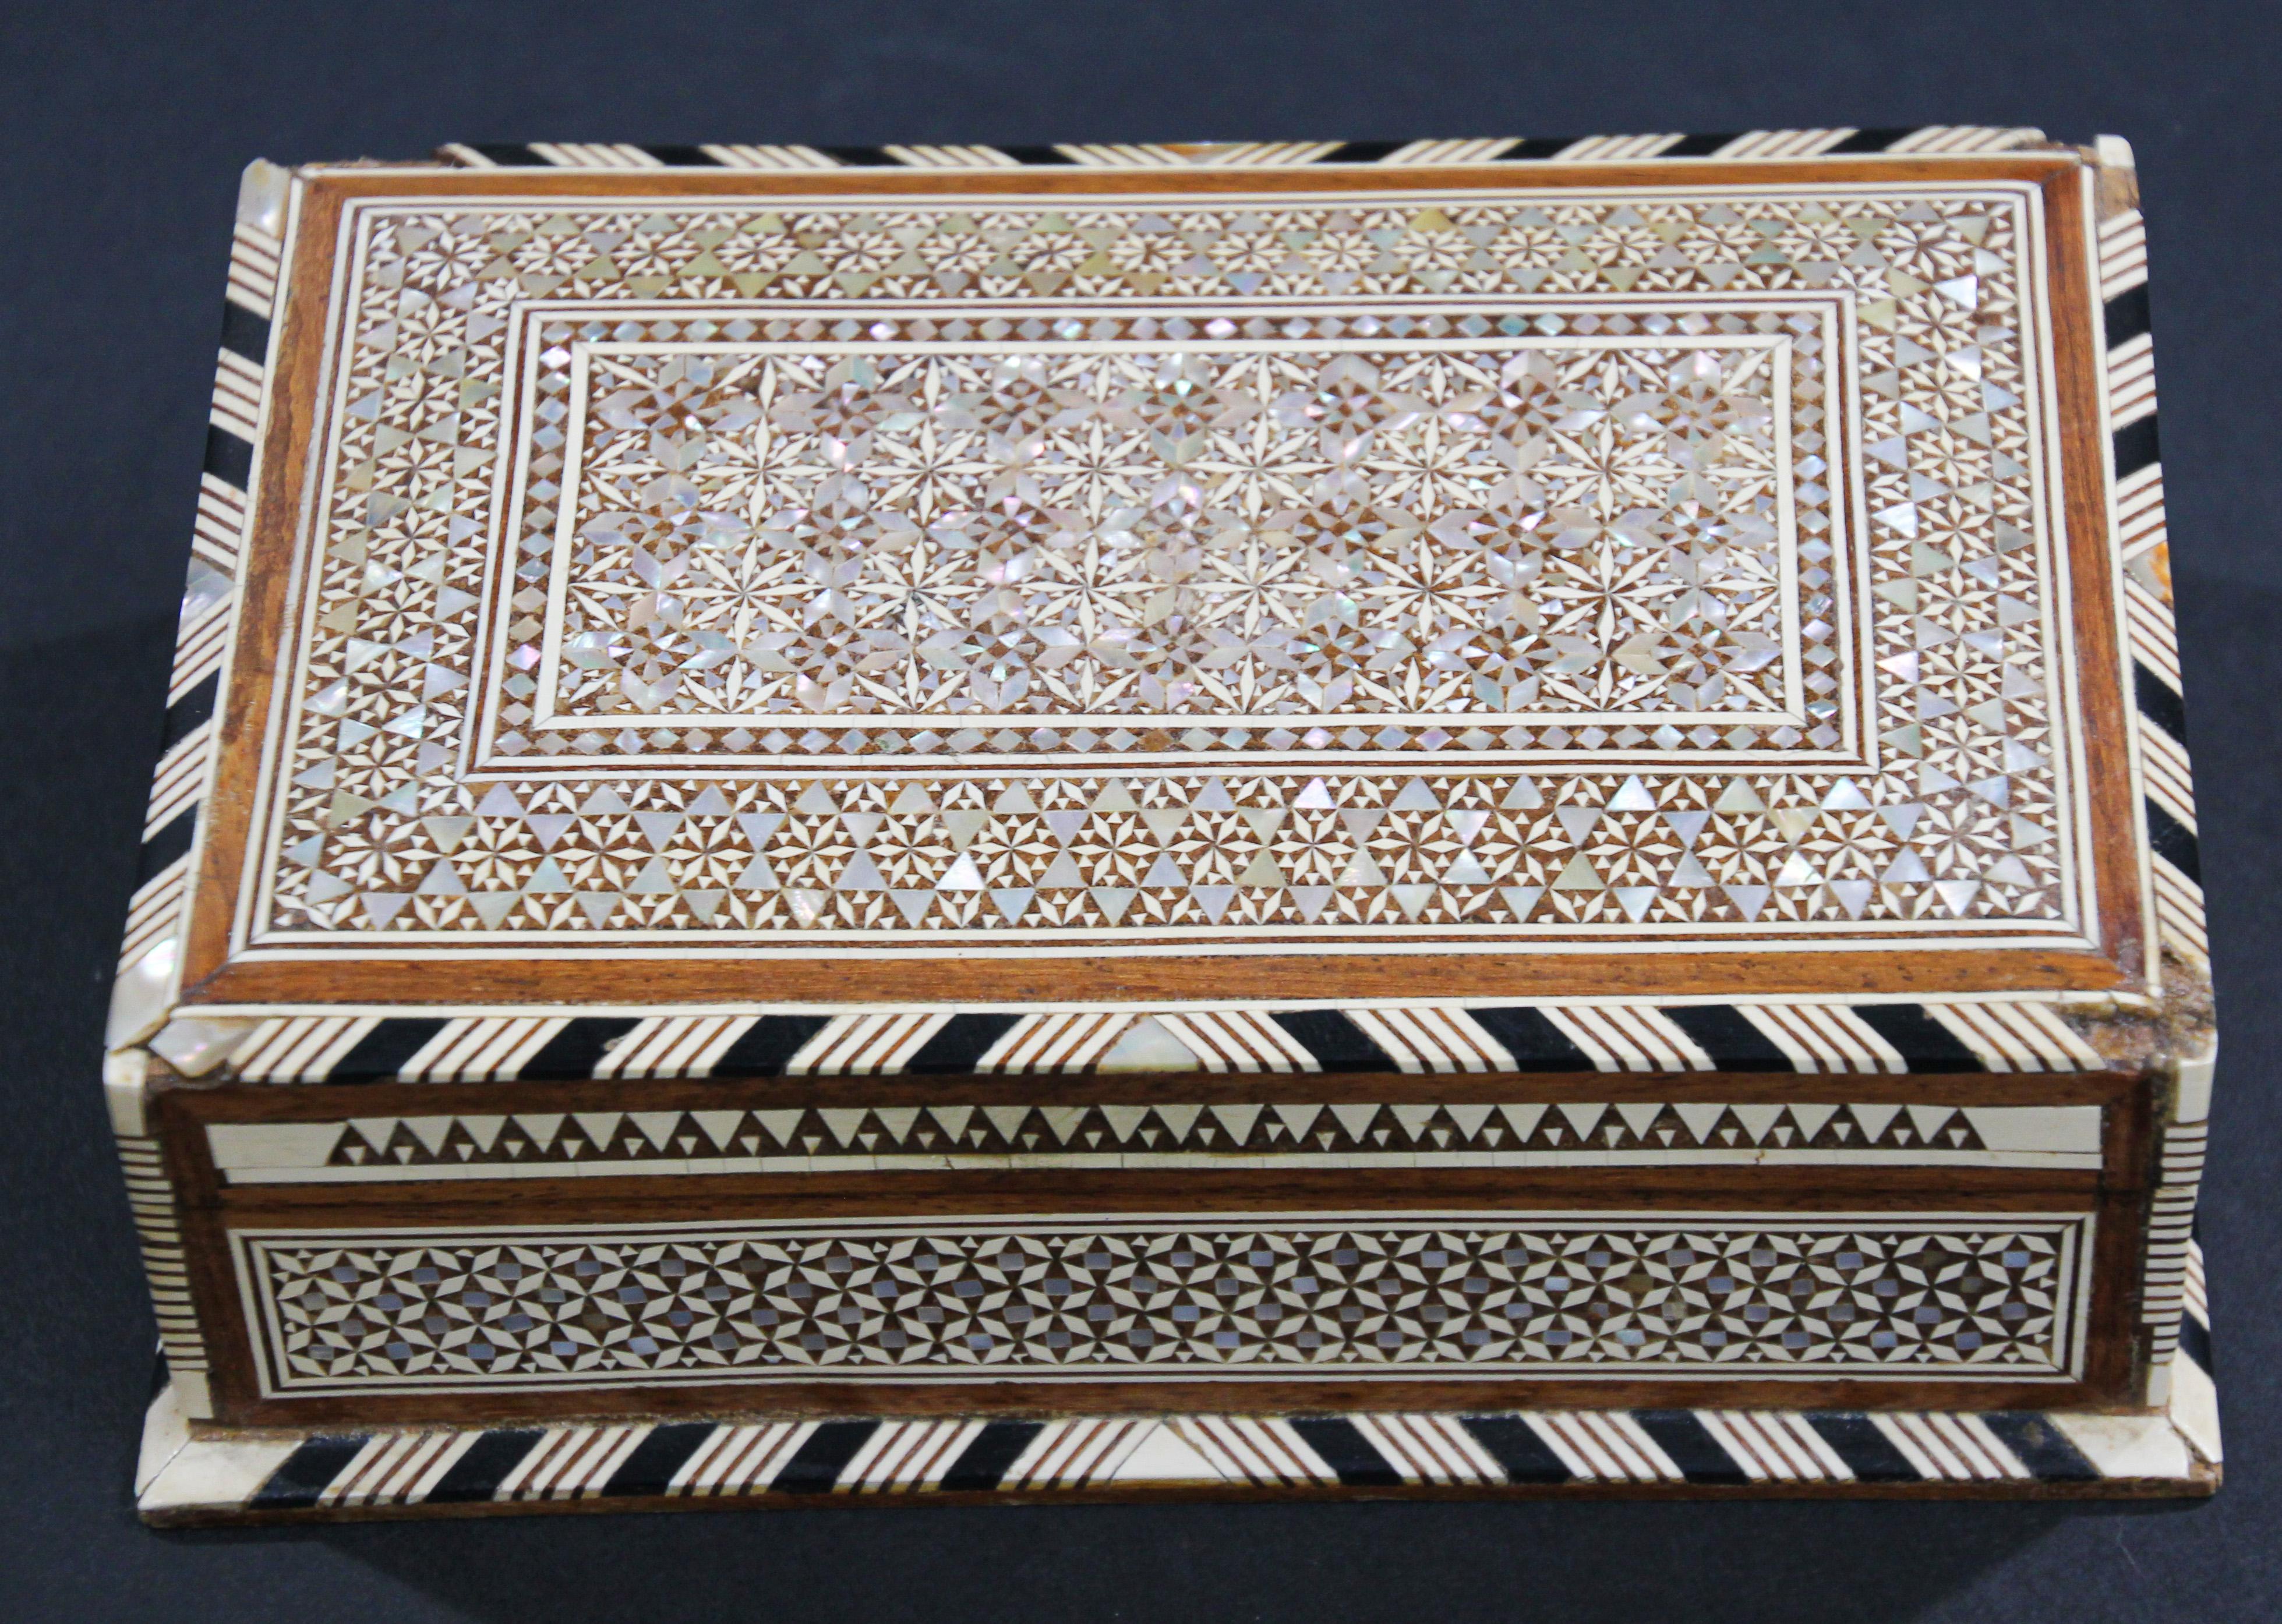 Lebanese Moorish Handcrafted Middle Eastern Mosaic Inlaid Decorative Box For Sale